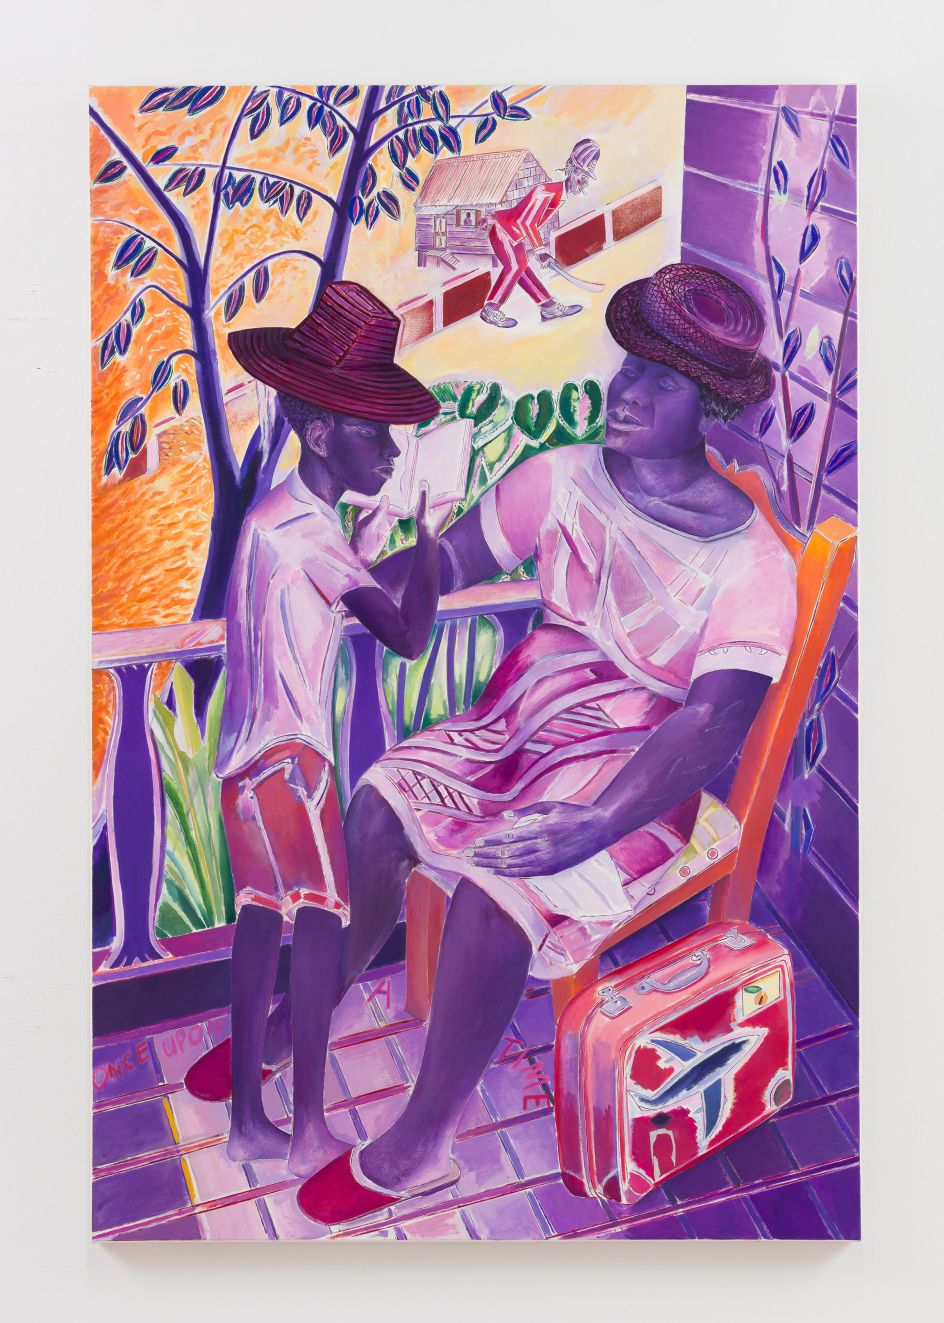 Denzil Forrester, ‘Reading with Ma Pets’, 2018. Oil on canvas, 183.3 x 122cm (72 1/8 x 48 1/8in). Copyright Denzil Forrester. Courtesy the artist and Stephen Friedman Gallery, London